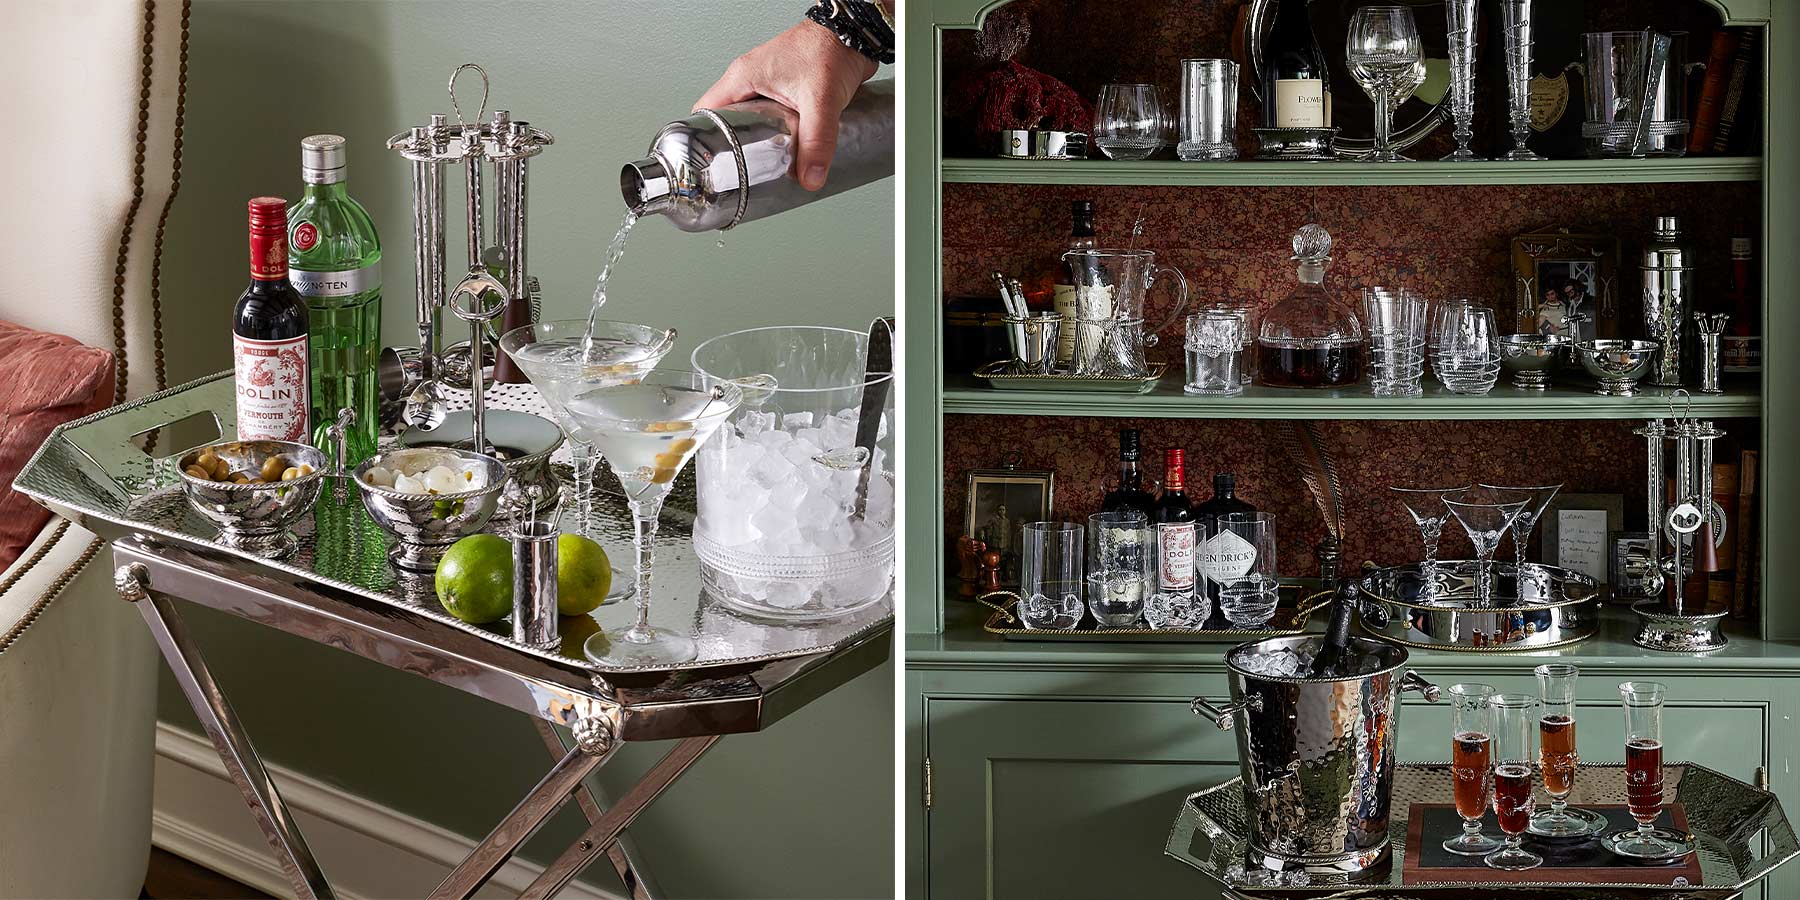 Favorite iterations of the home bar is a “pop-up” bar using a large serving tray that can be moved anywhere on a whim.